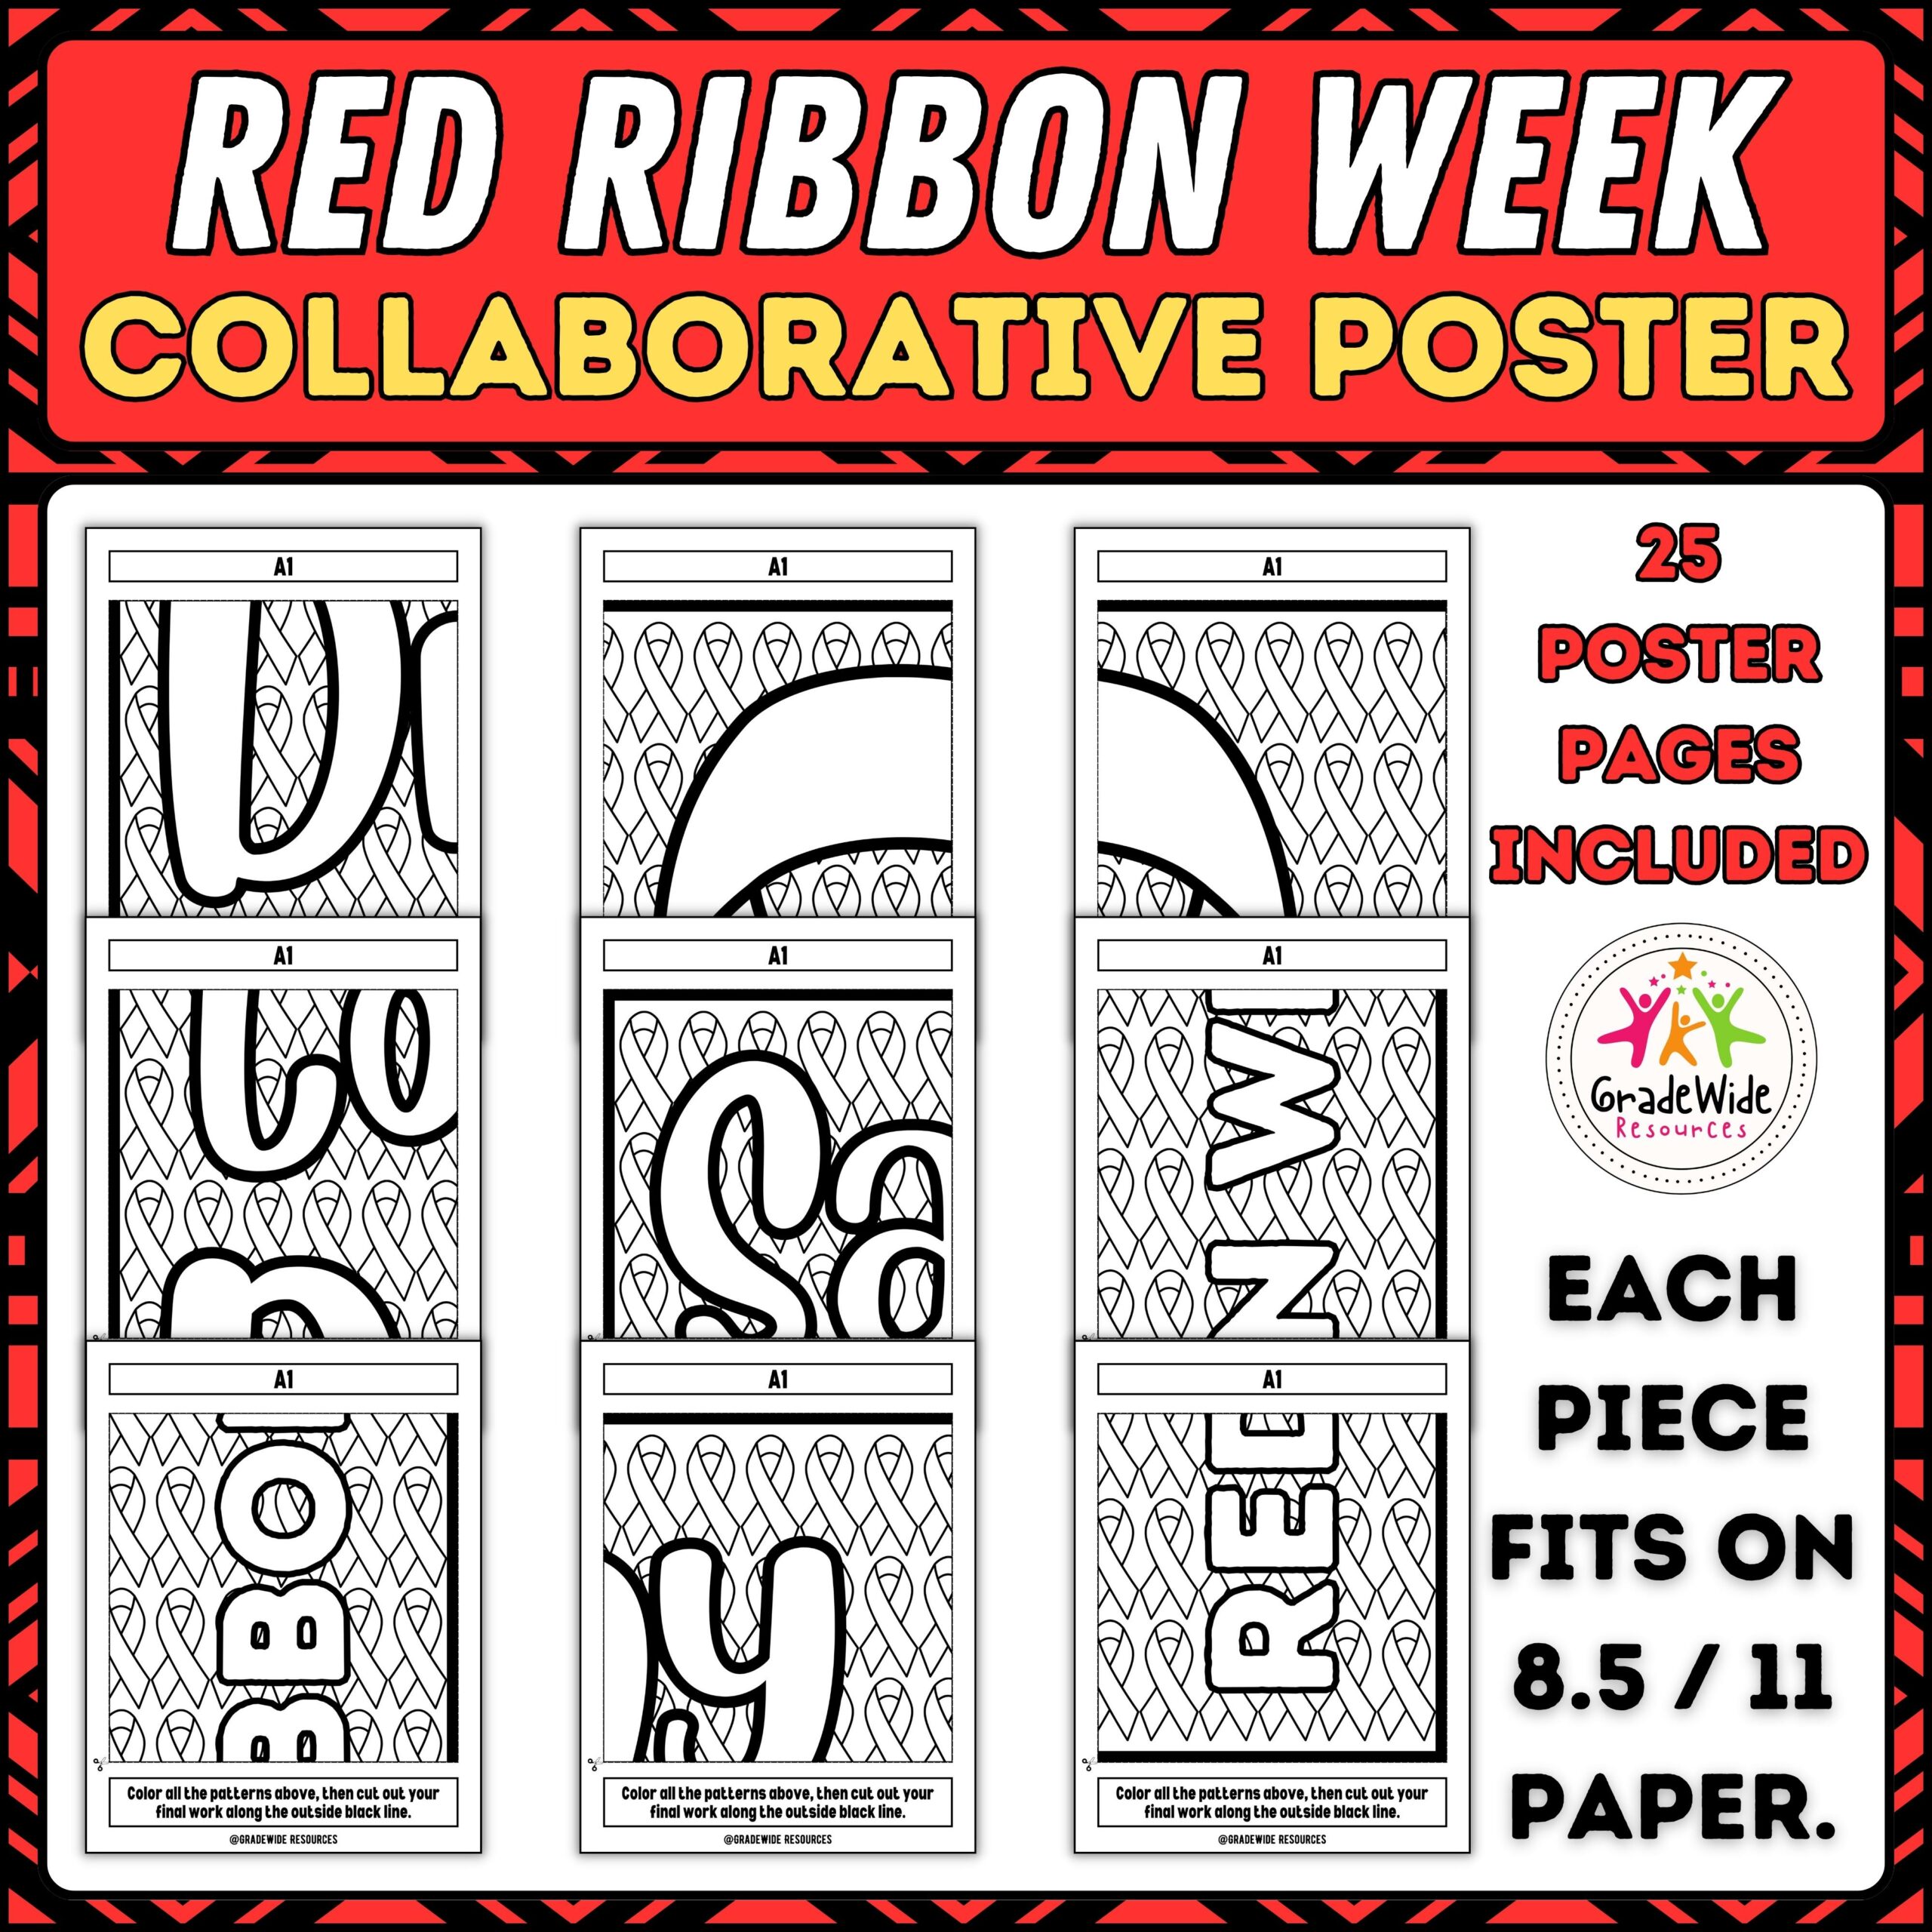 Red ribbon week collaborative coloring poster say no to drugs together made by teachers